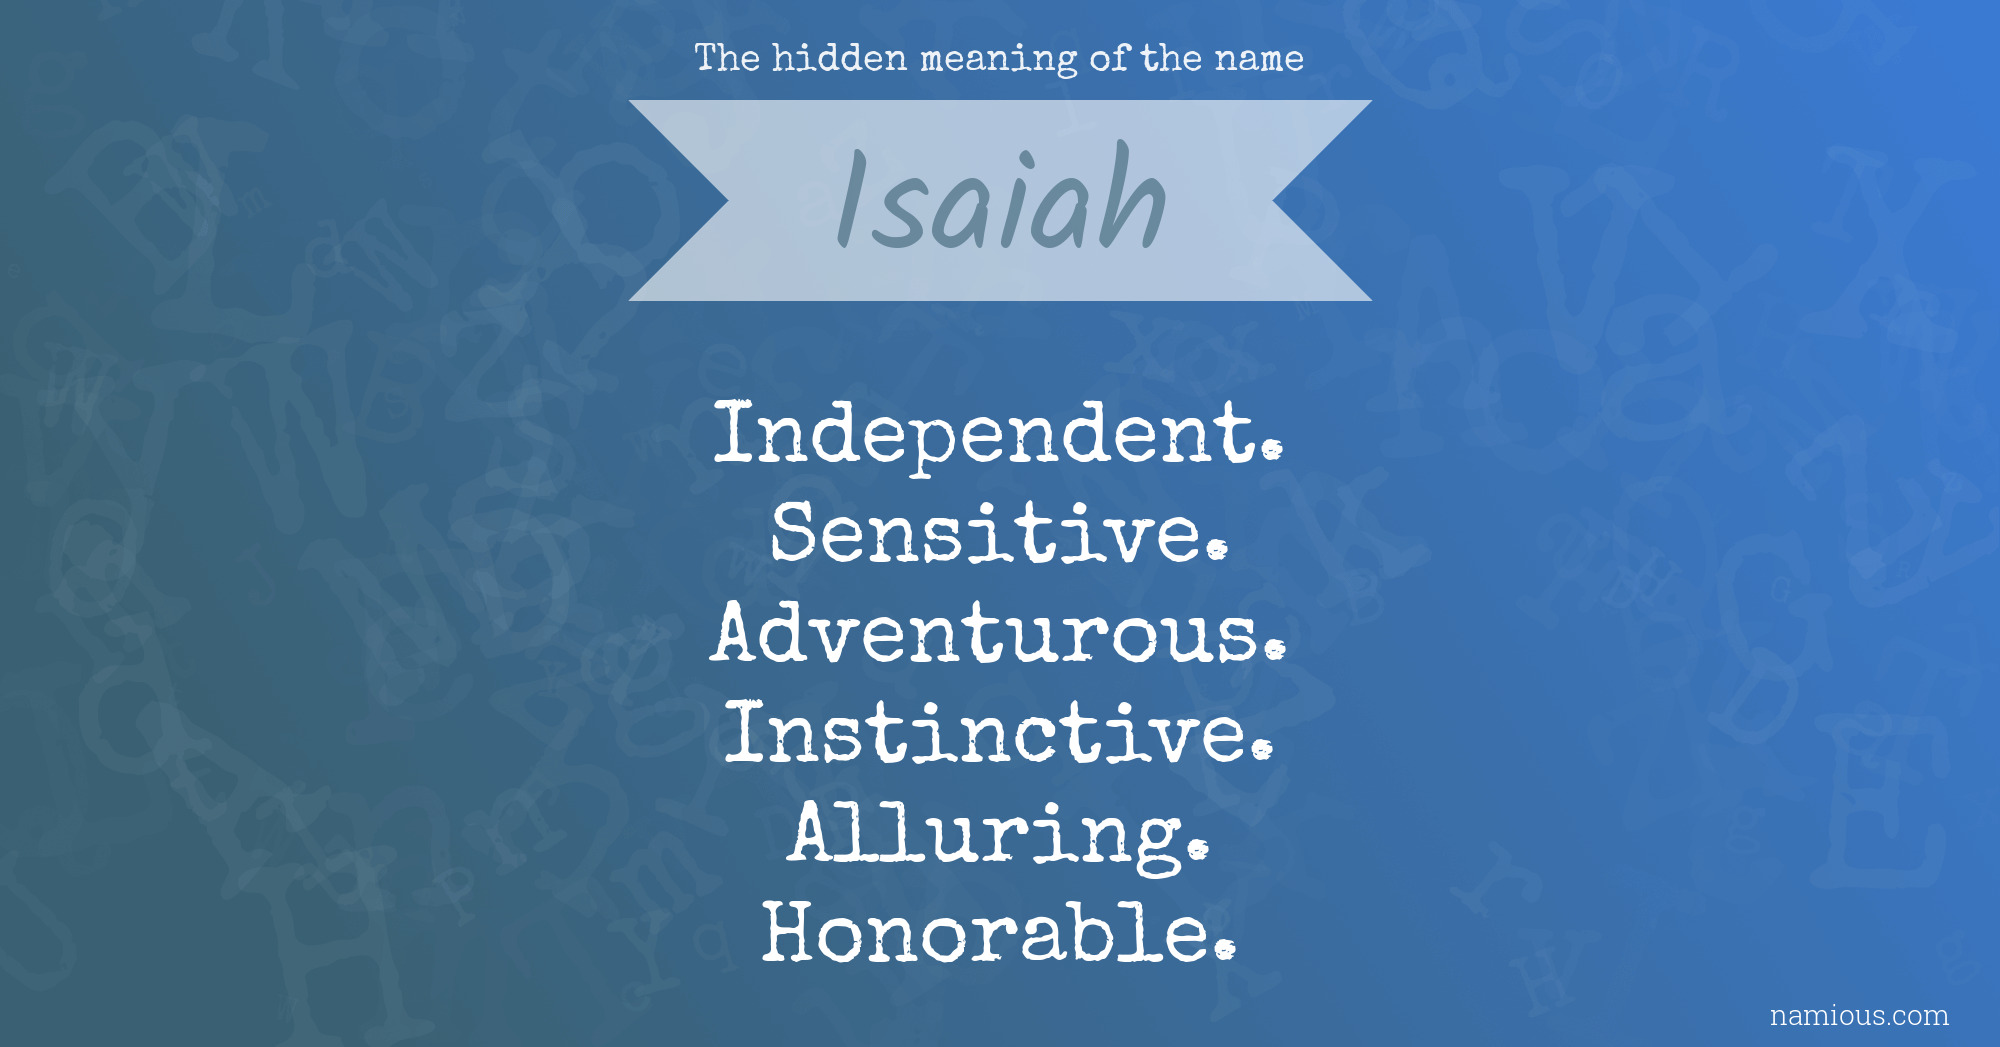 The hidden meaning of the name Isaiah